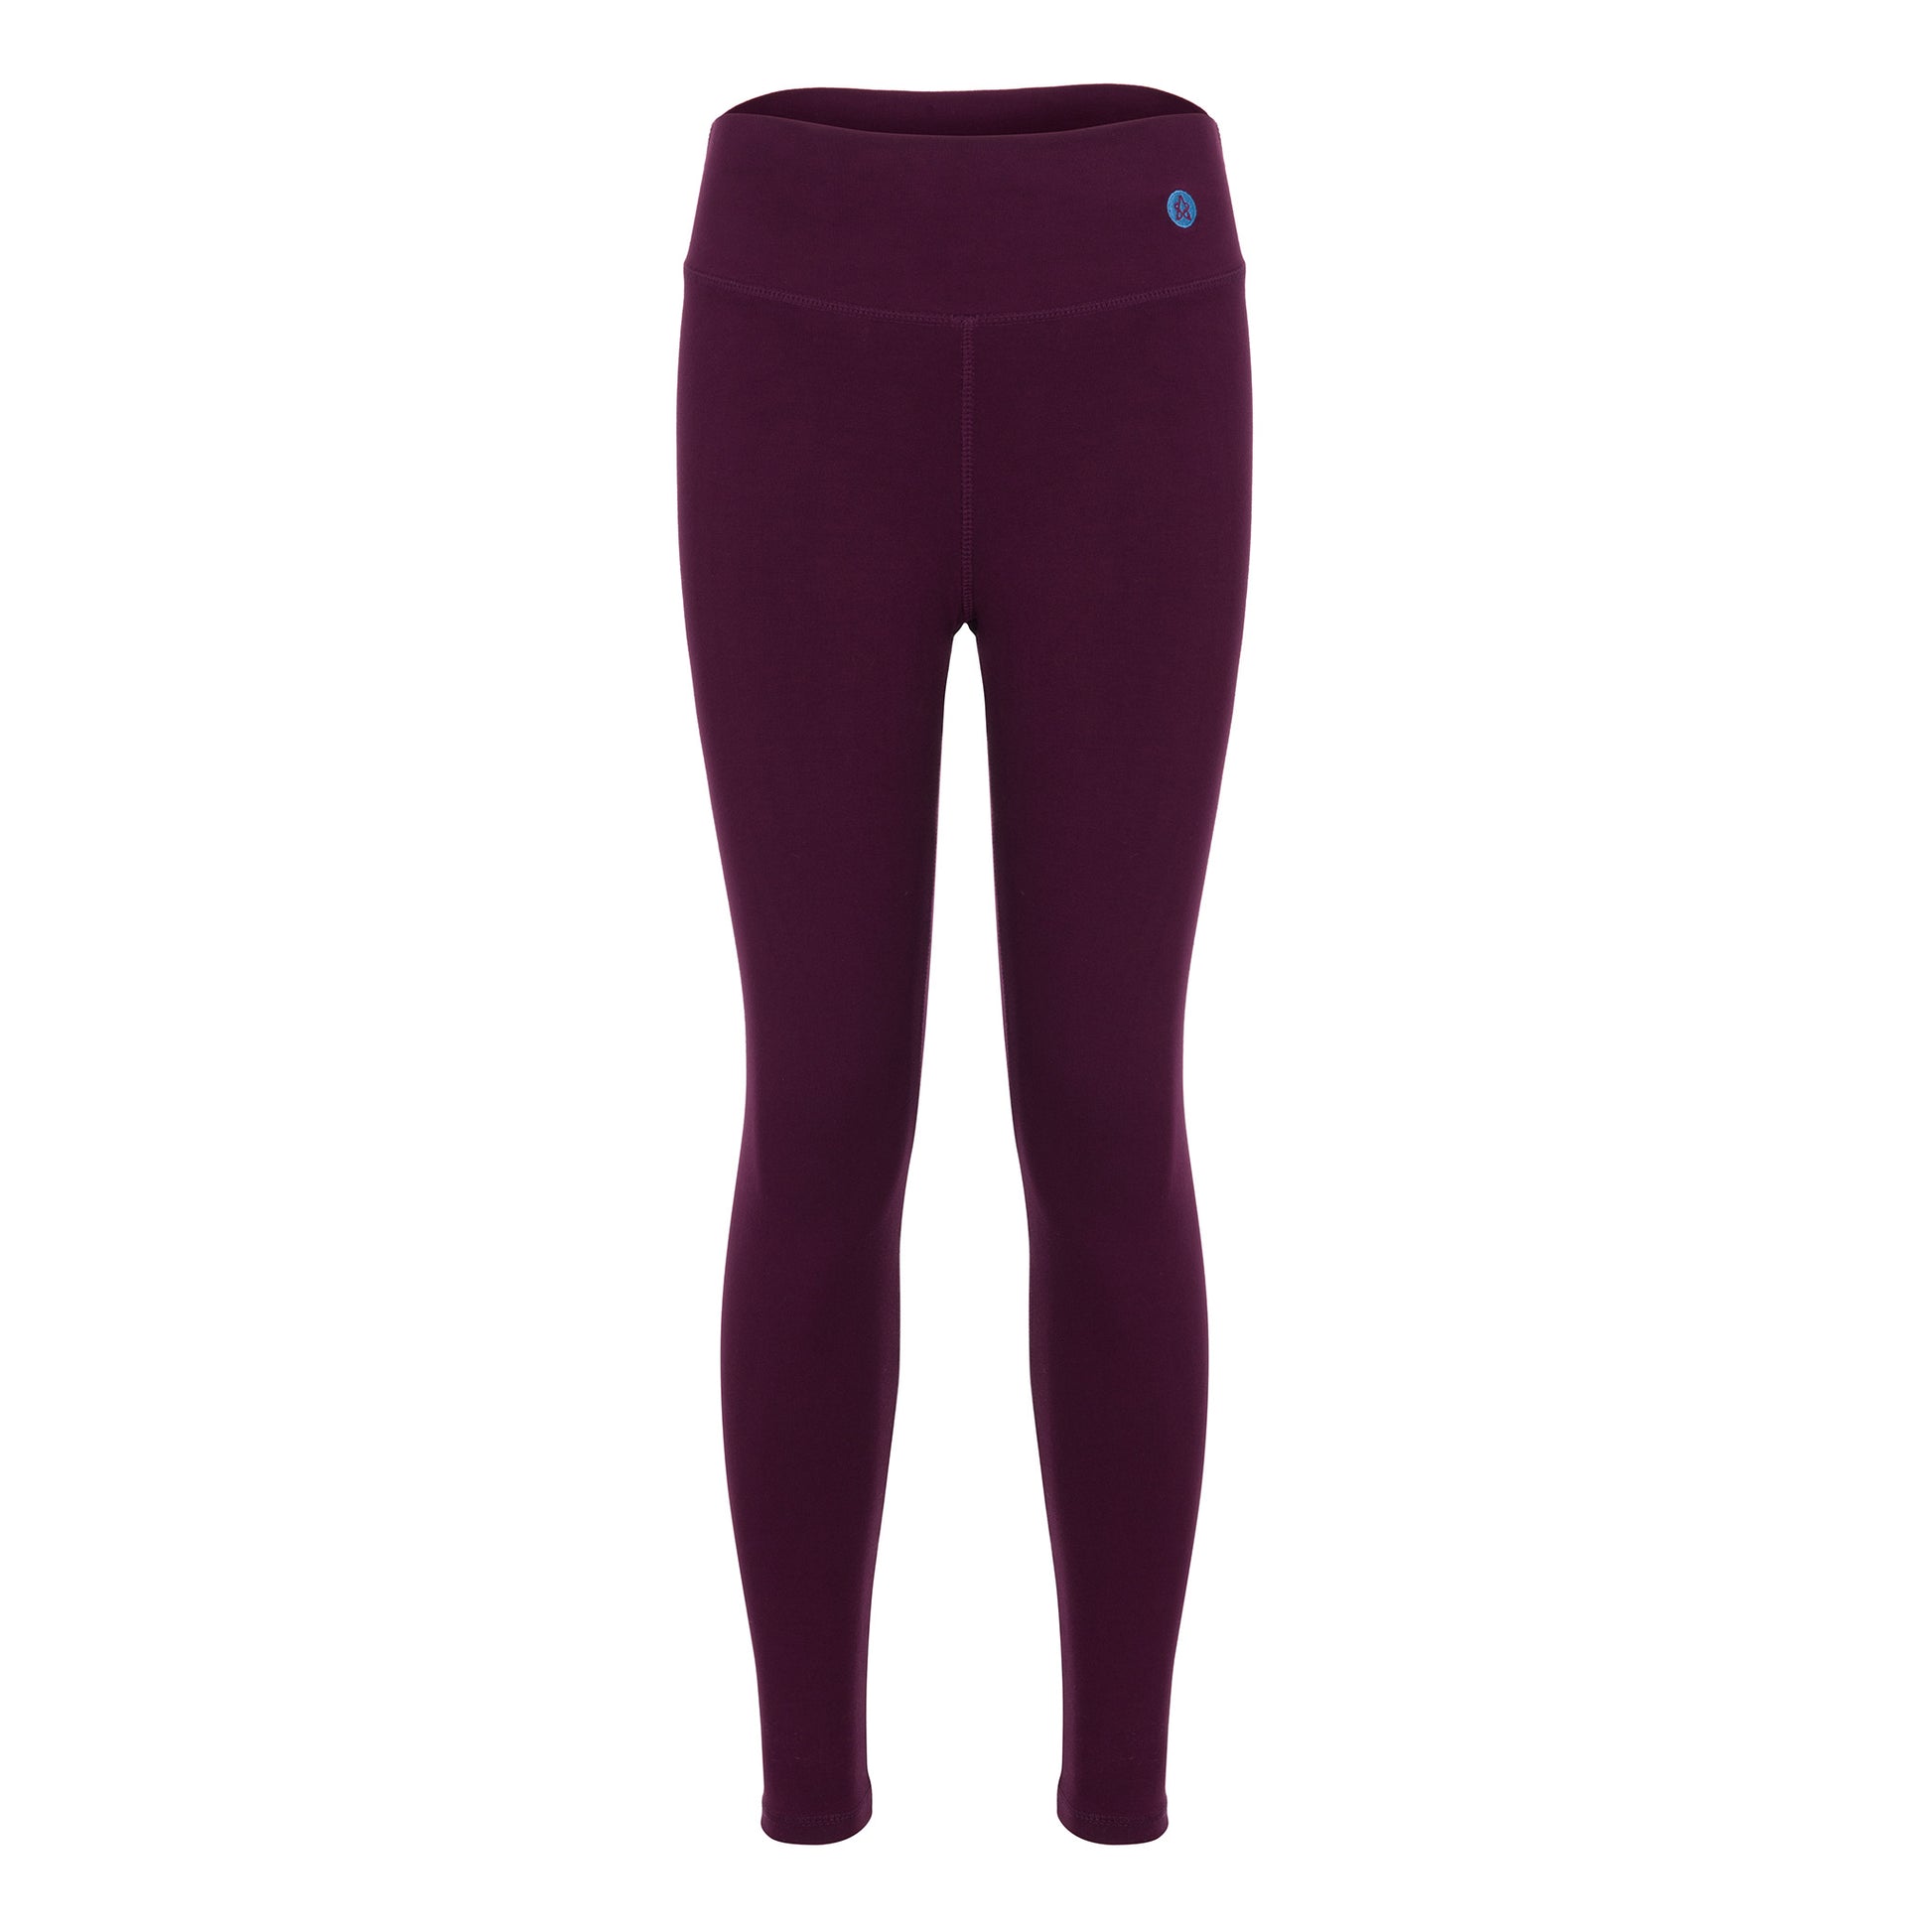 Buy Comfort Lady Women's Cotton Ankle Length Leggings Free Size -(Free,  Deep Pink) at